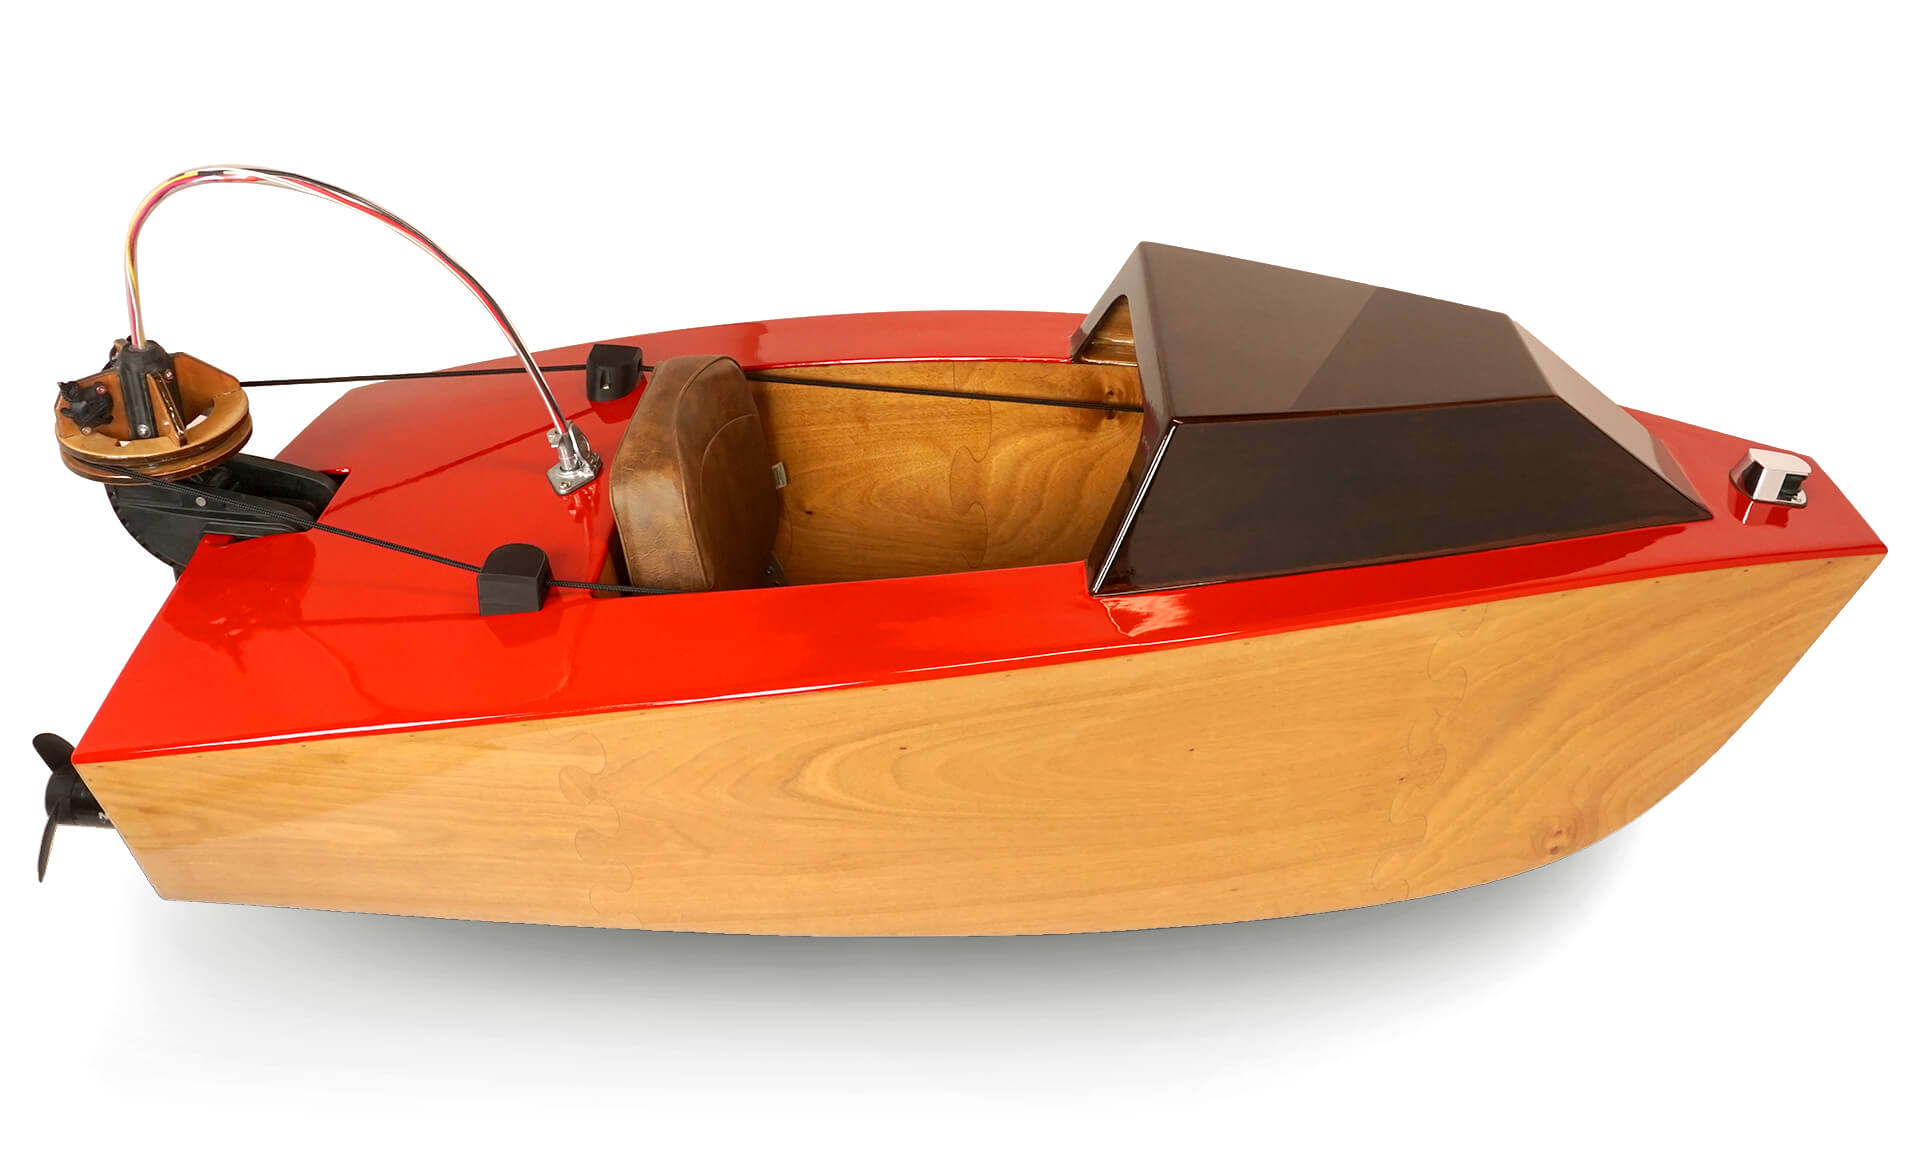 A side / top view of the mini electric boat